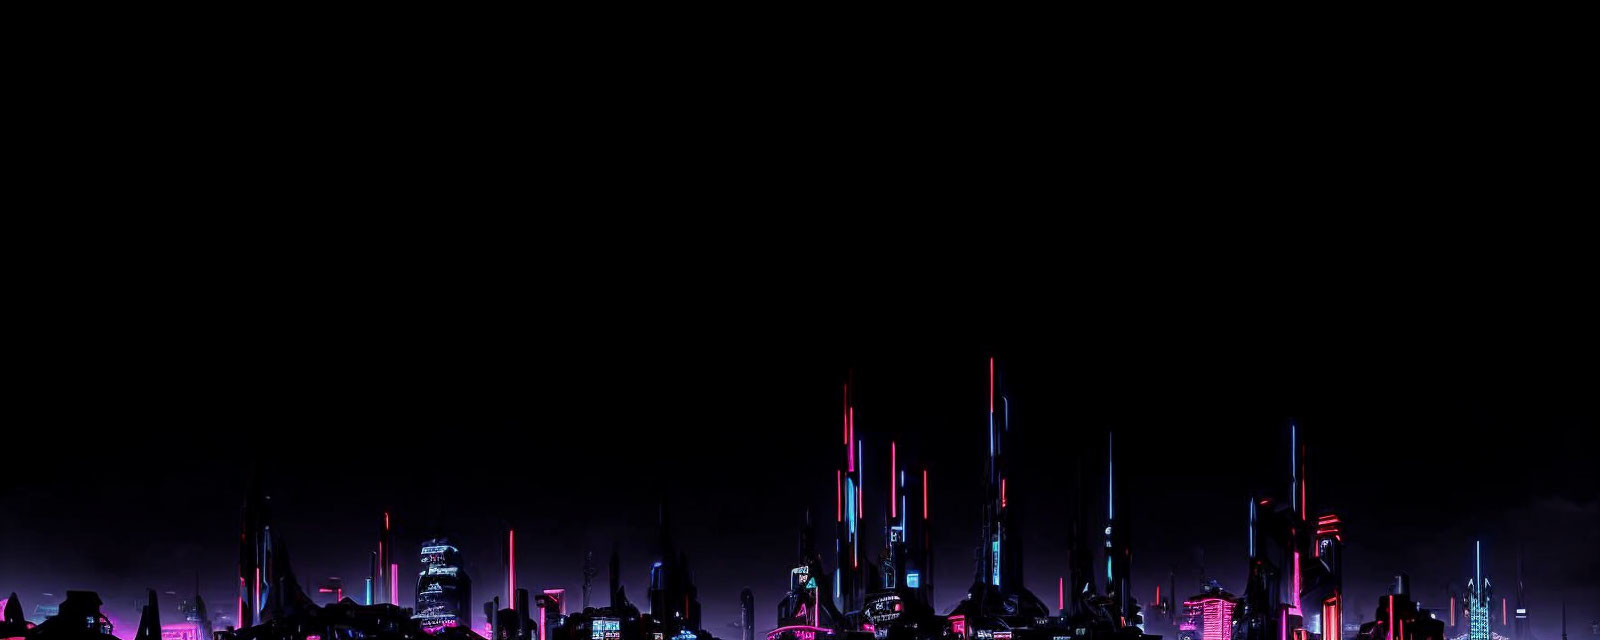 Futuristic city skyline at night with neon lights and skyscrapers